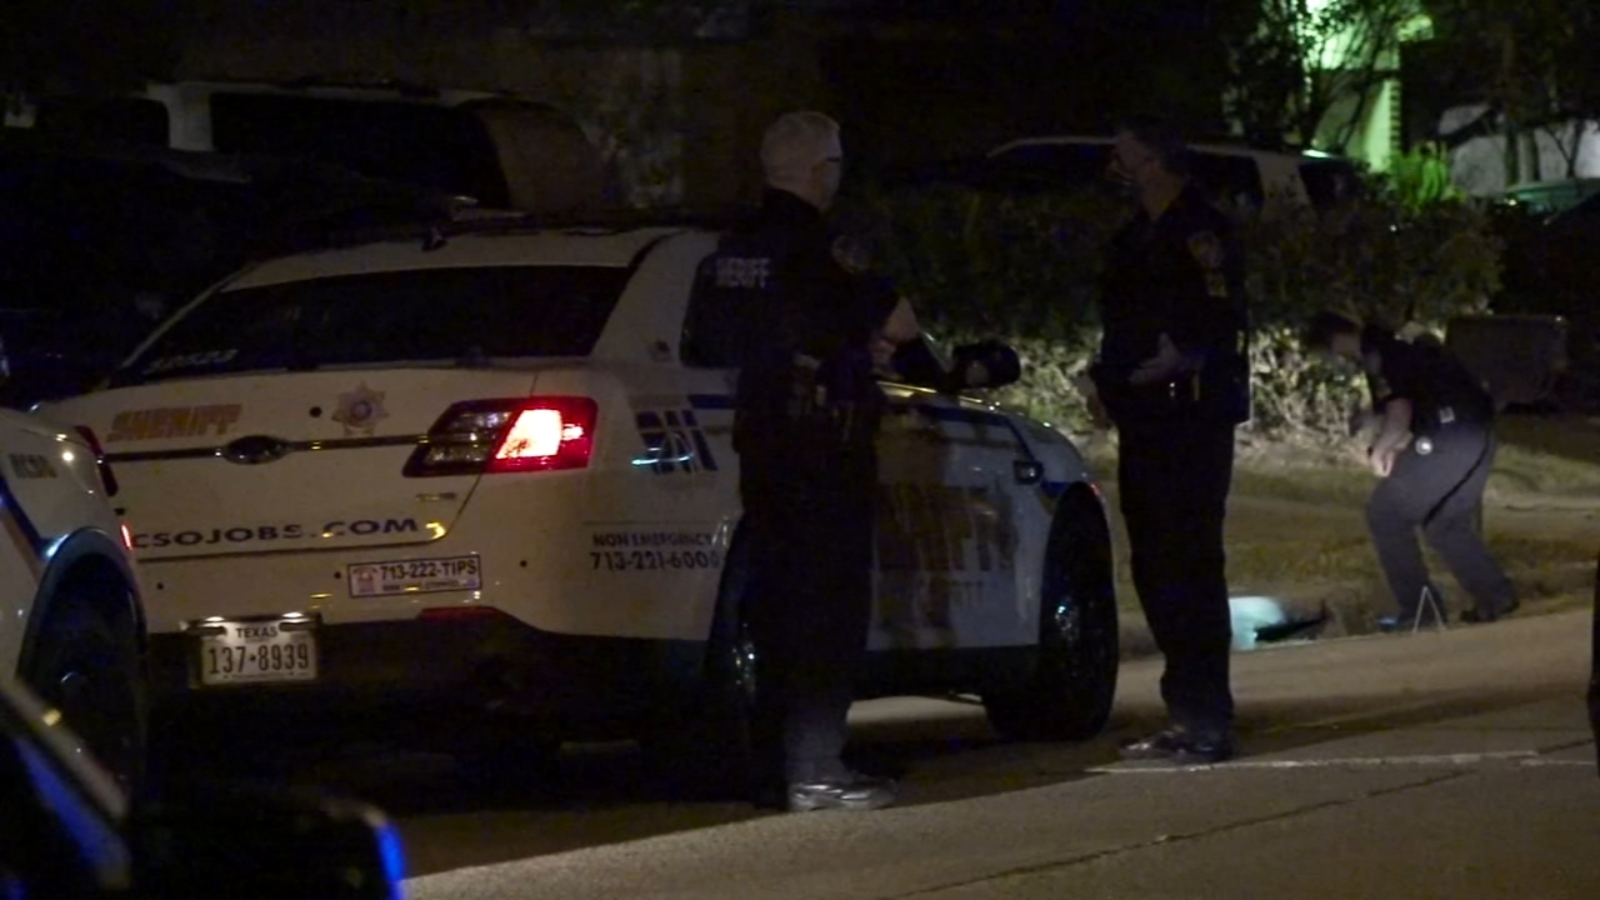 12-year-old boy shot in drive-by while he slept in Mission Bend